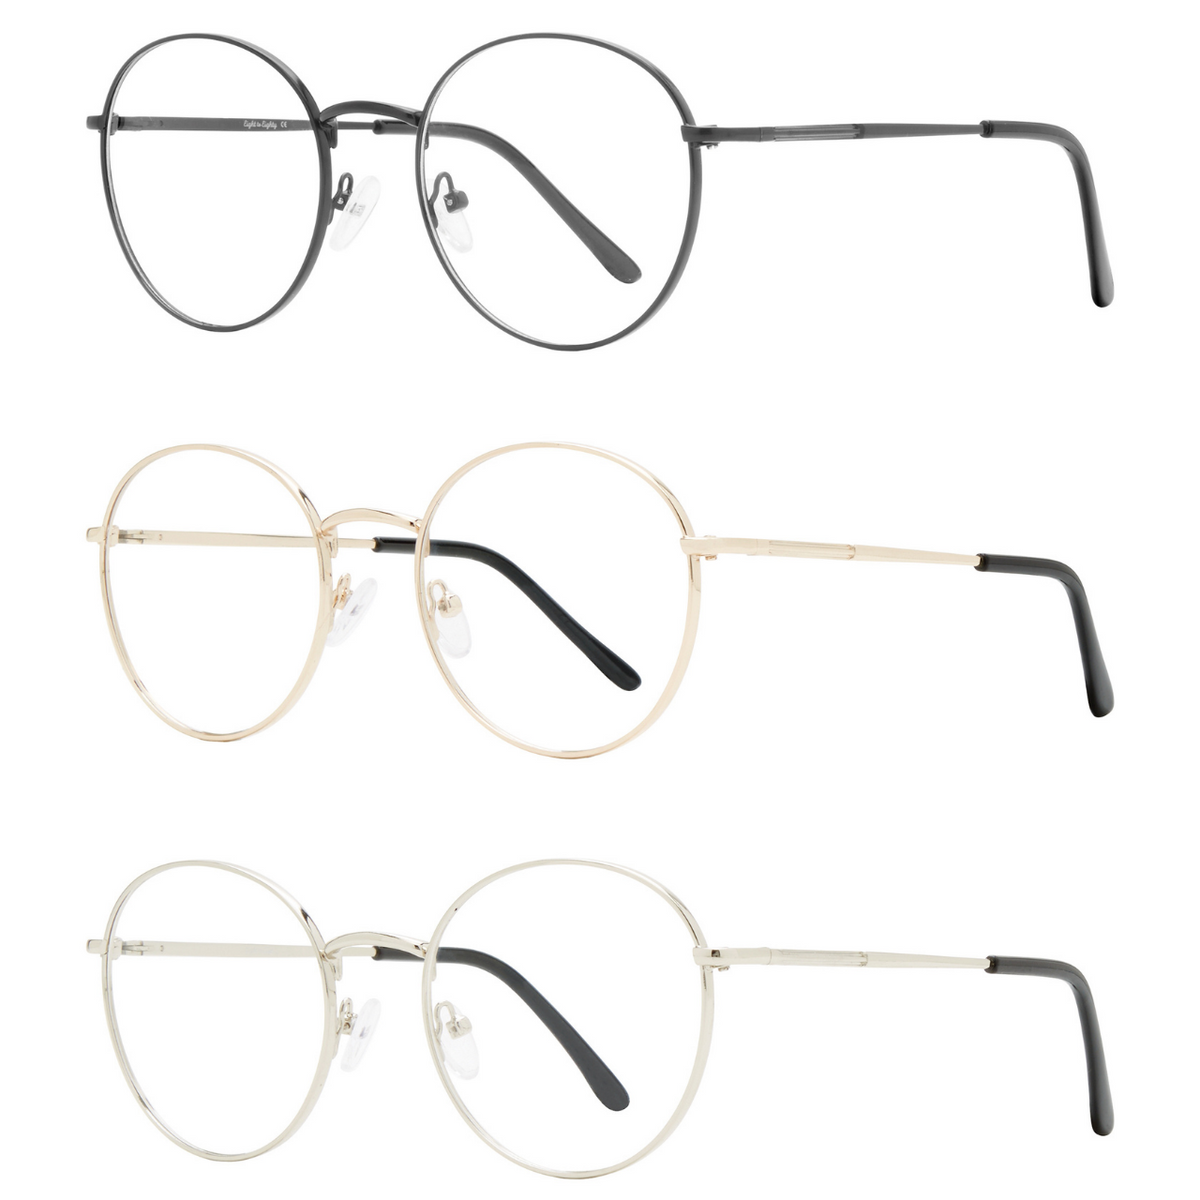 Round Wire Frame Glasses - Woodstock